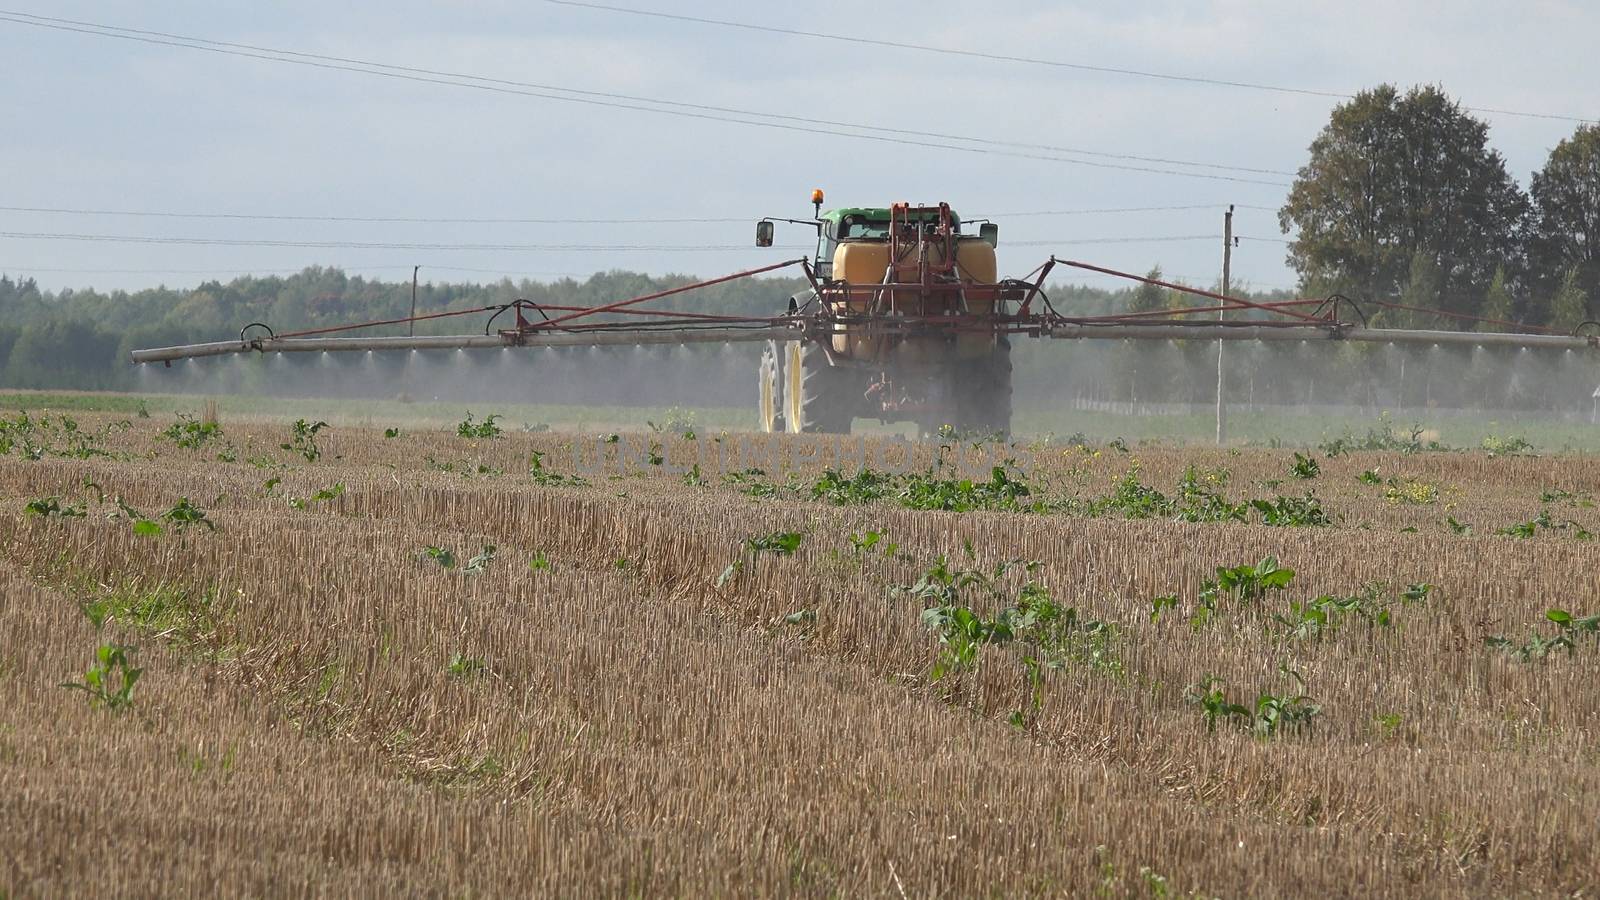 Tractor spray stubble field with herbicide chemicals in autumn by sauletas